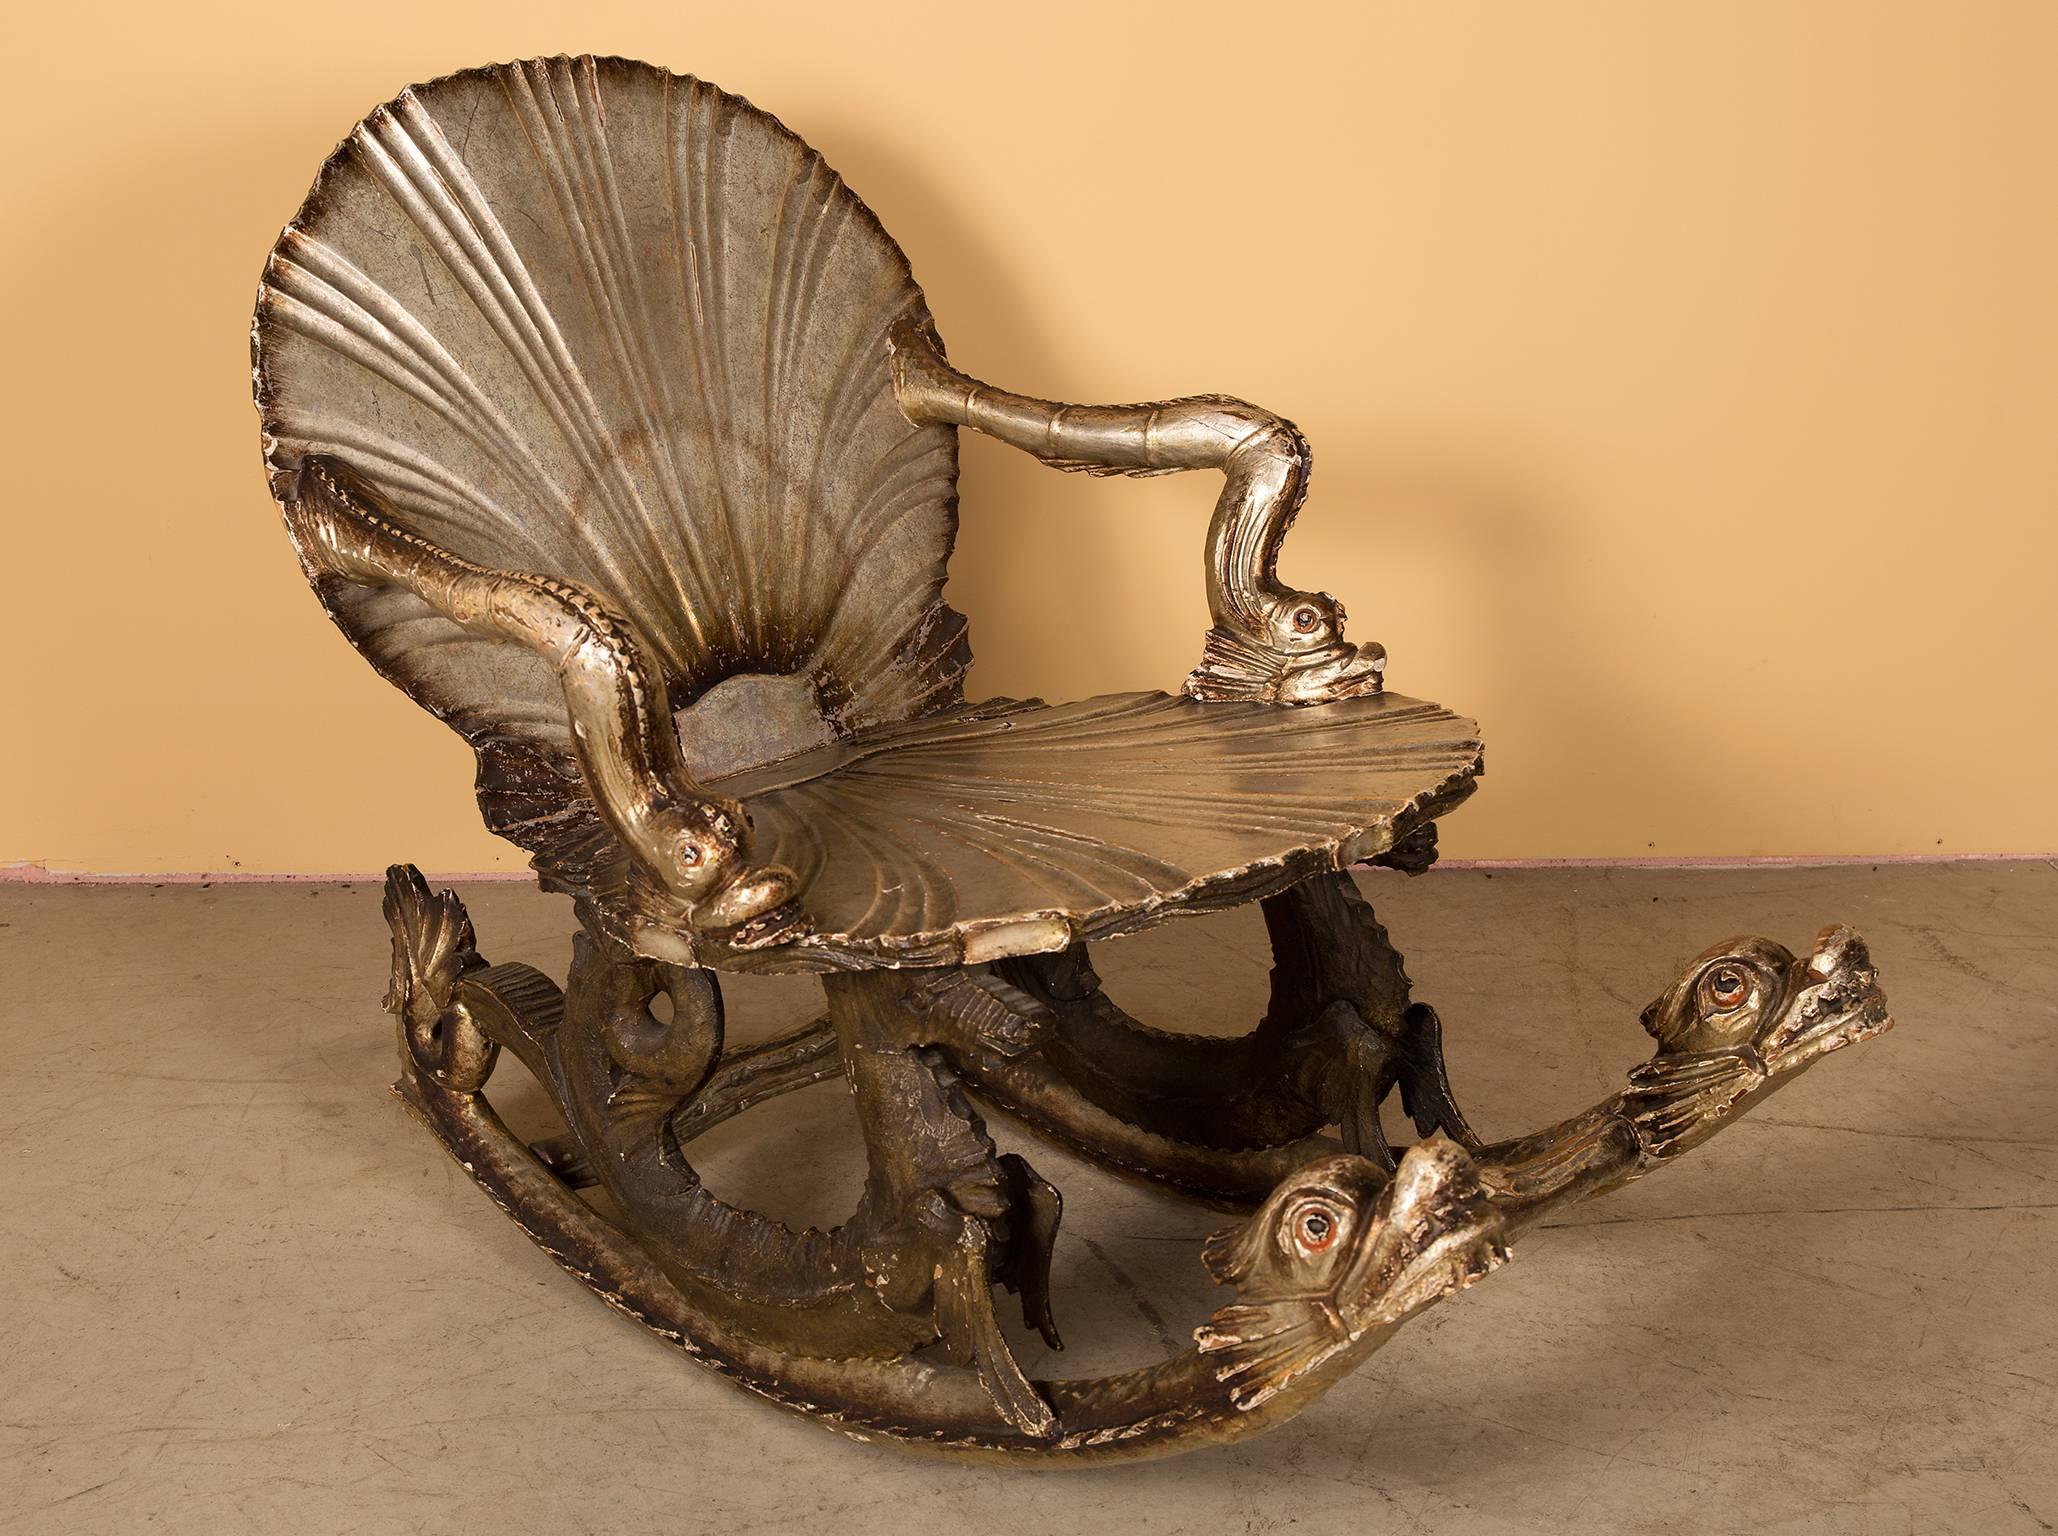 Grotto furniture originates to furnish the folly buildings at the estates of the 18th century aristocracy in England and Europe. The Grotto rocking chair first made its appearance in the 1840s in the USA as a form of childrens furniture. The model